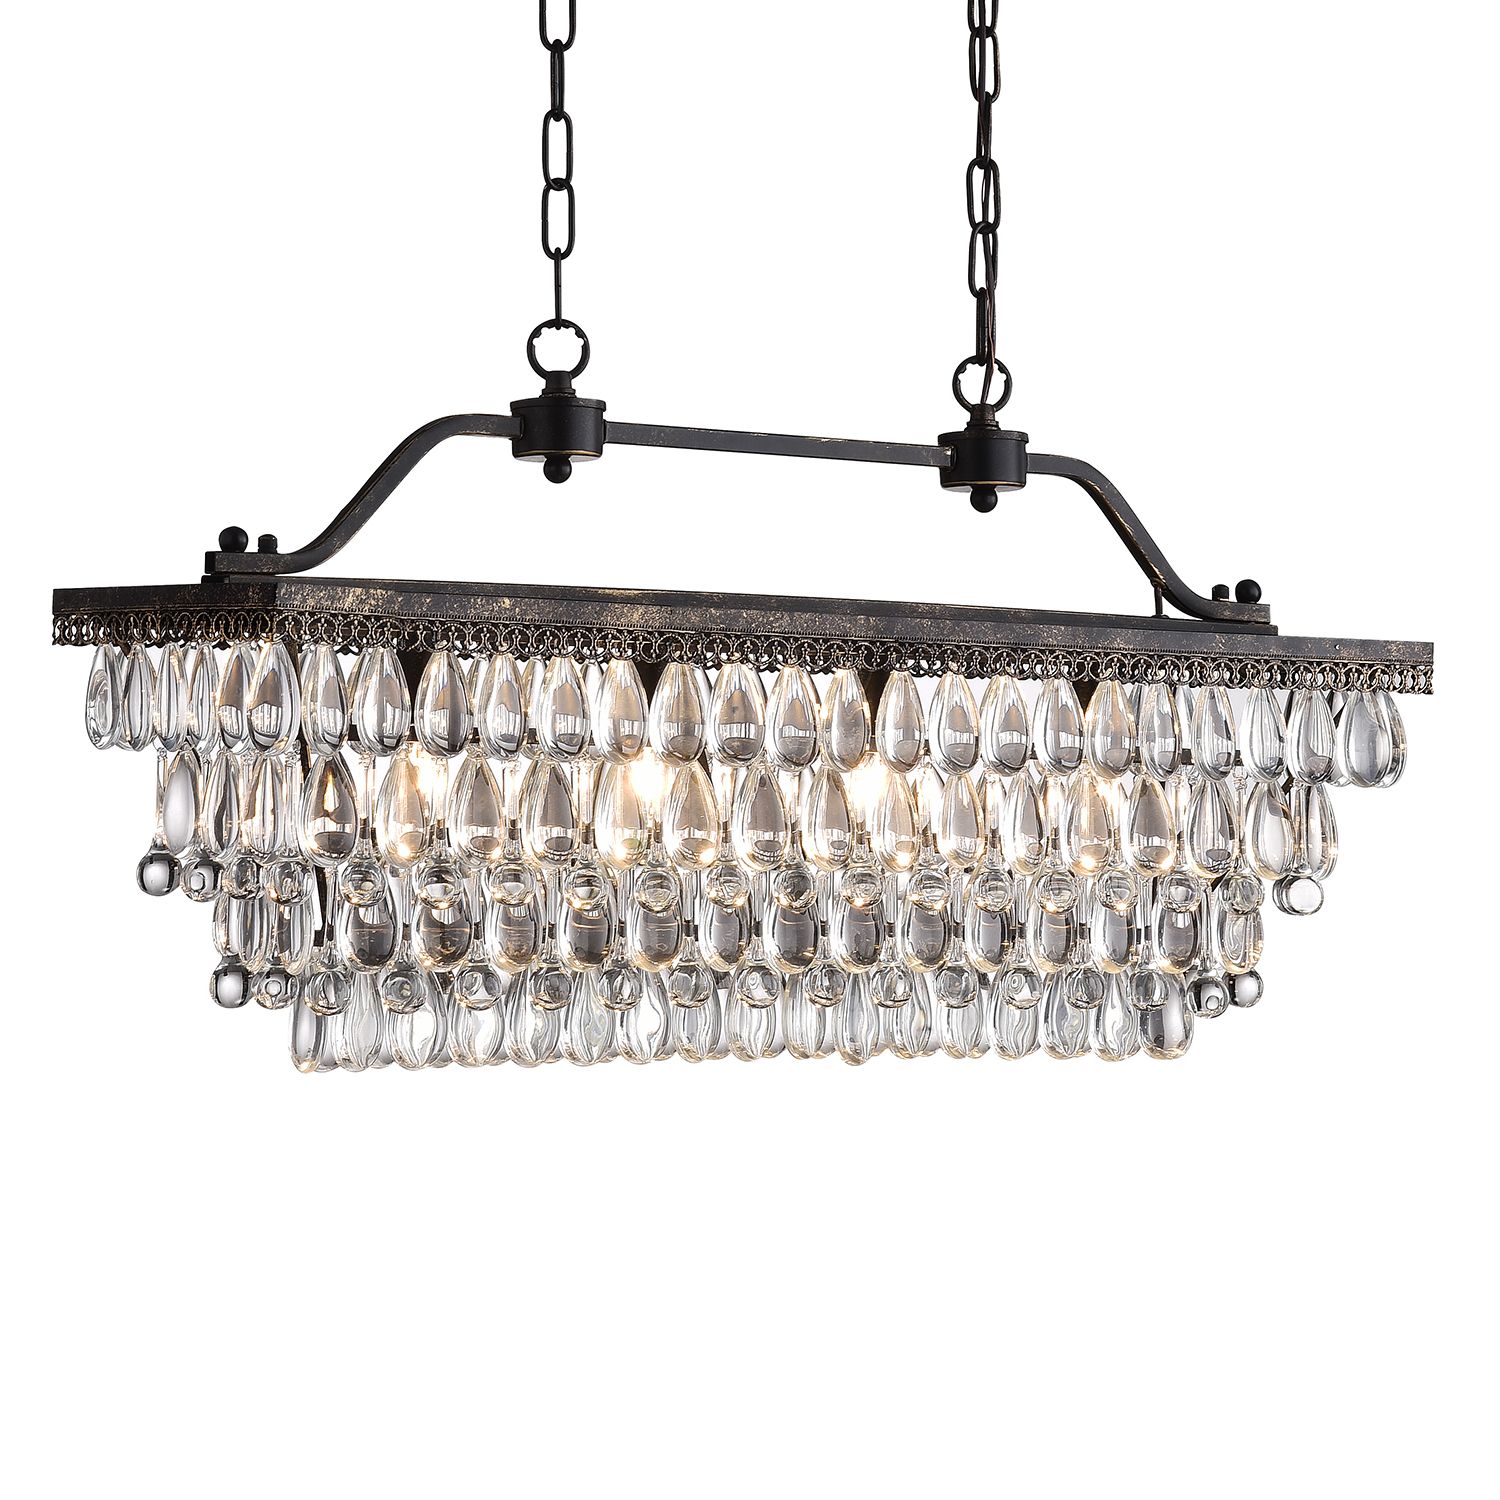 4 Light Antique Bronze Rectangular Crystal Chandelier With Regard To Most Popular Bronze And Scavo Glass Chandeliers (View 17 of 20)